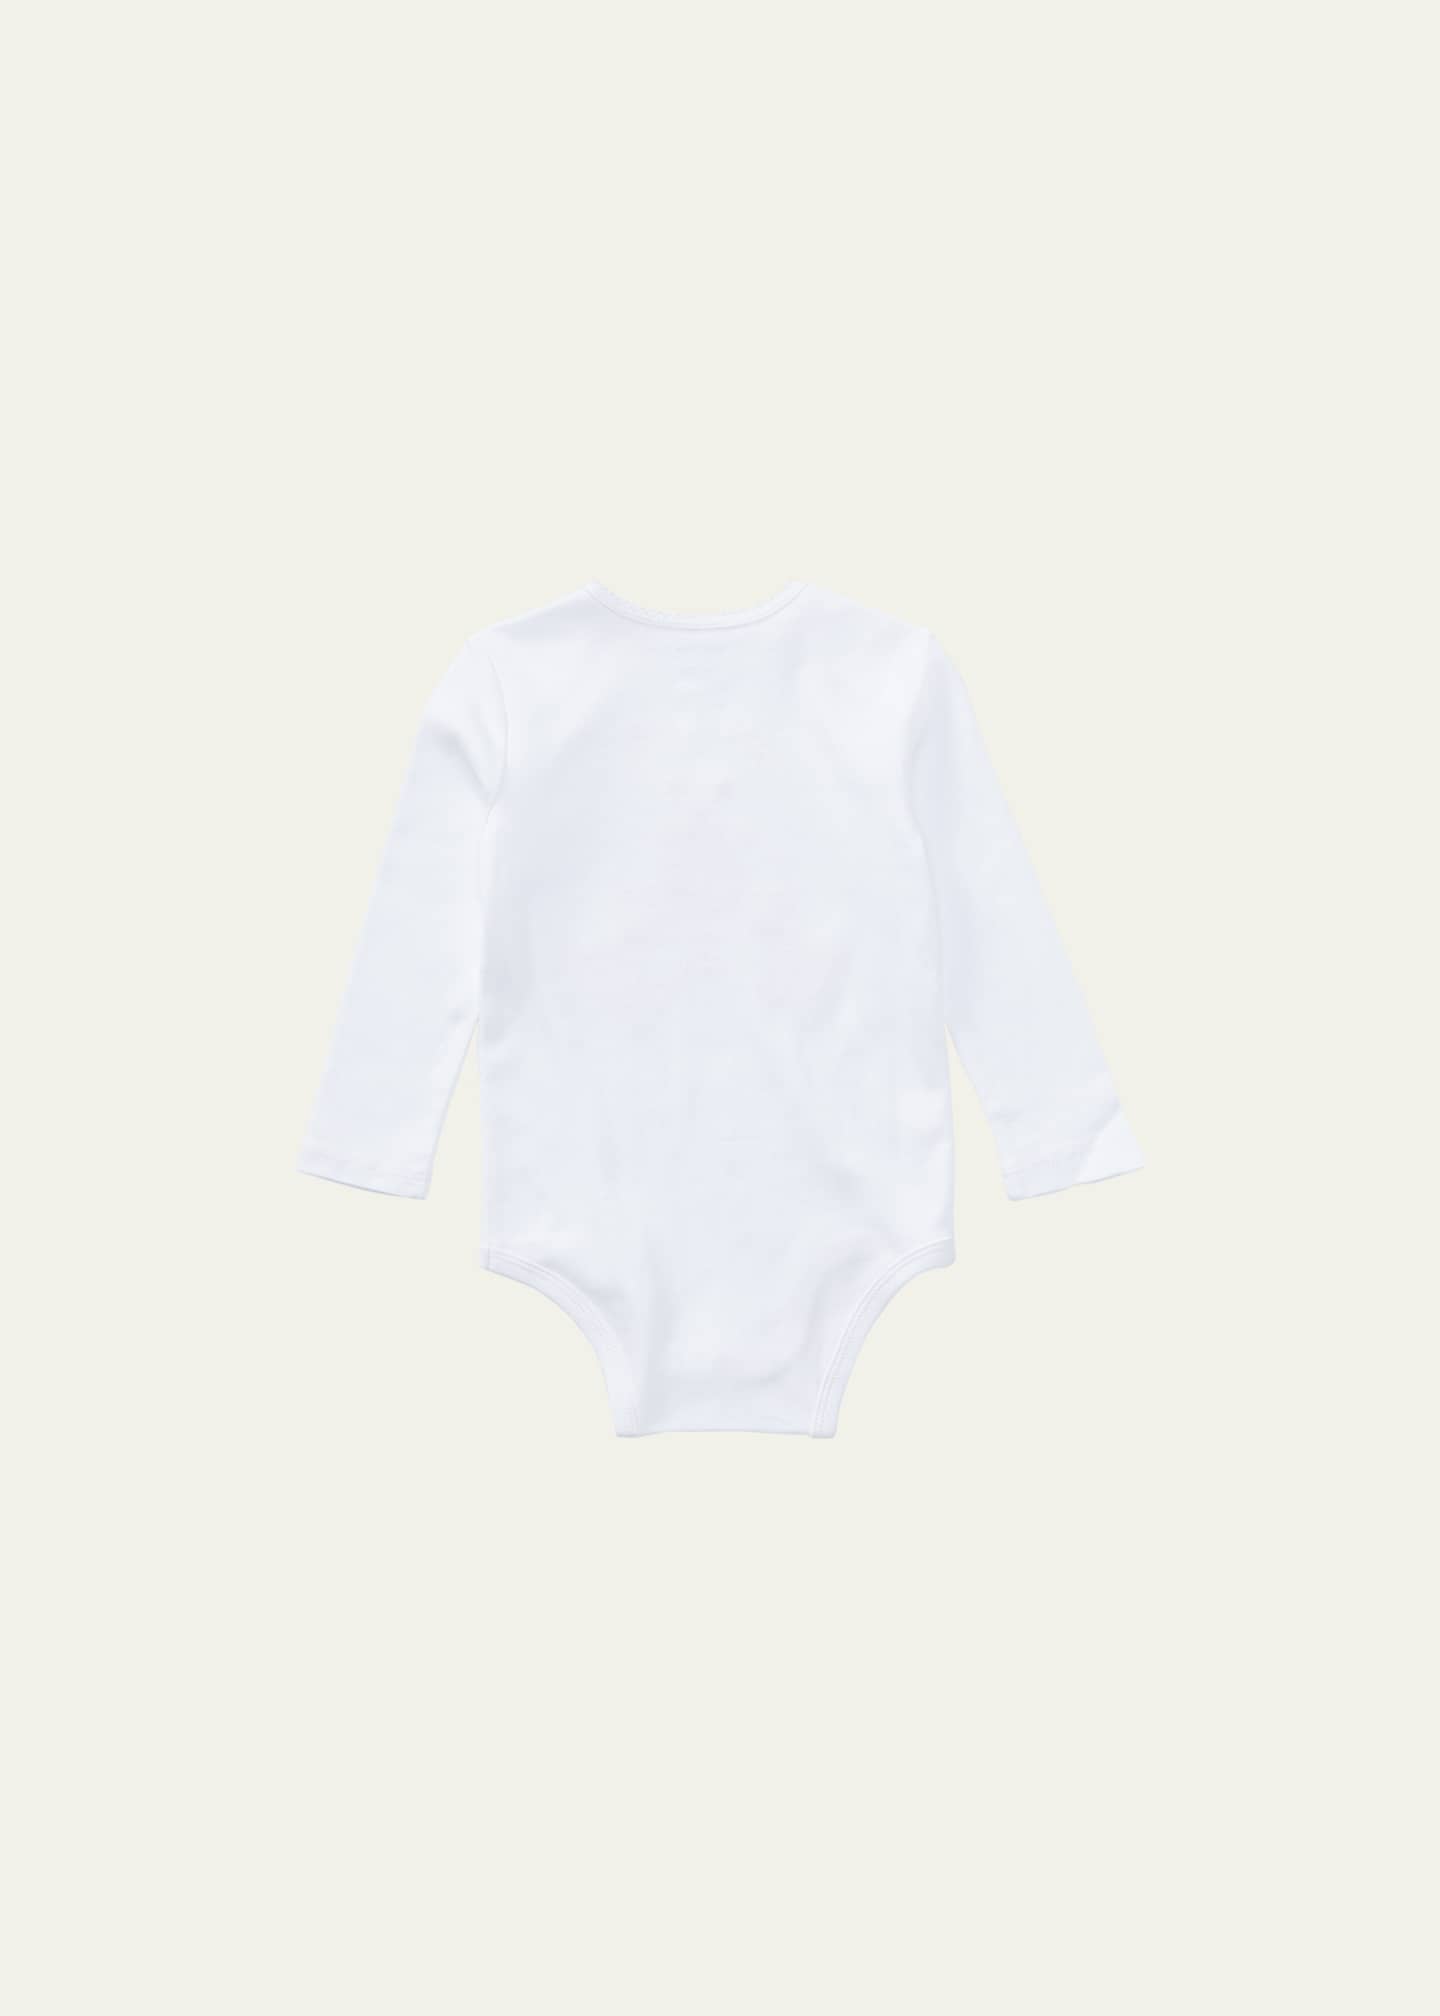 Ralph Lauren Childrenswear Polo Bear Embroidered Long-Sleeve Bodysuit, Size 3M-12M Image 2 of 2